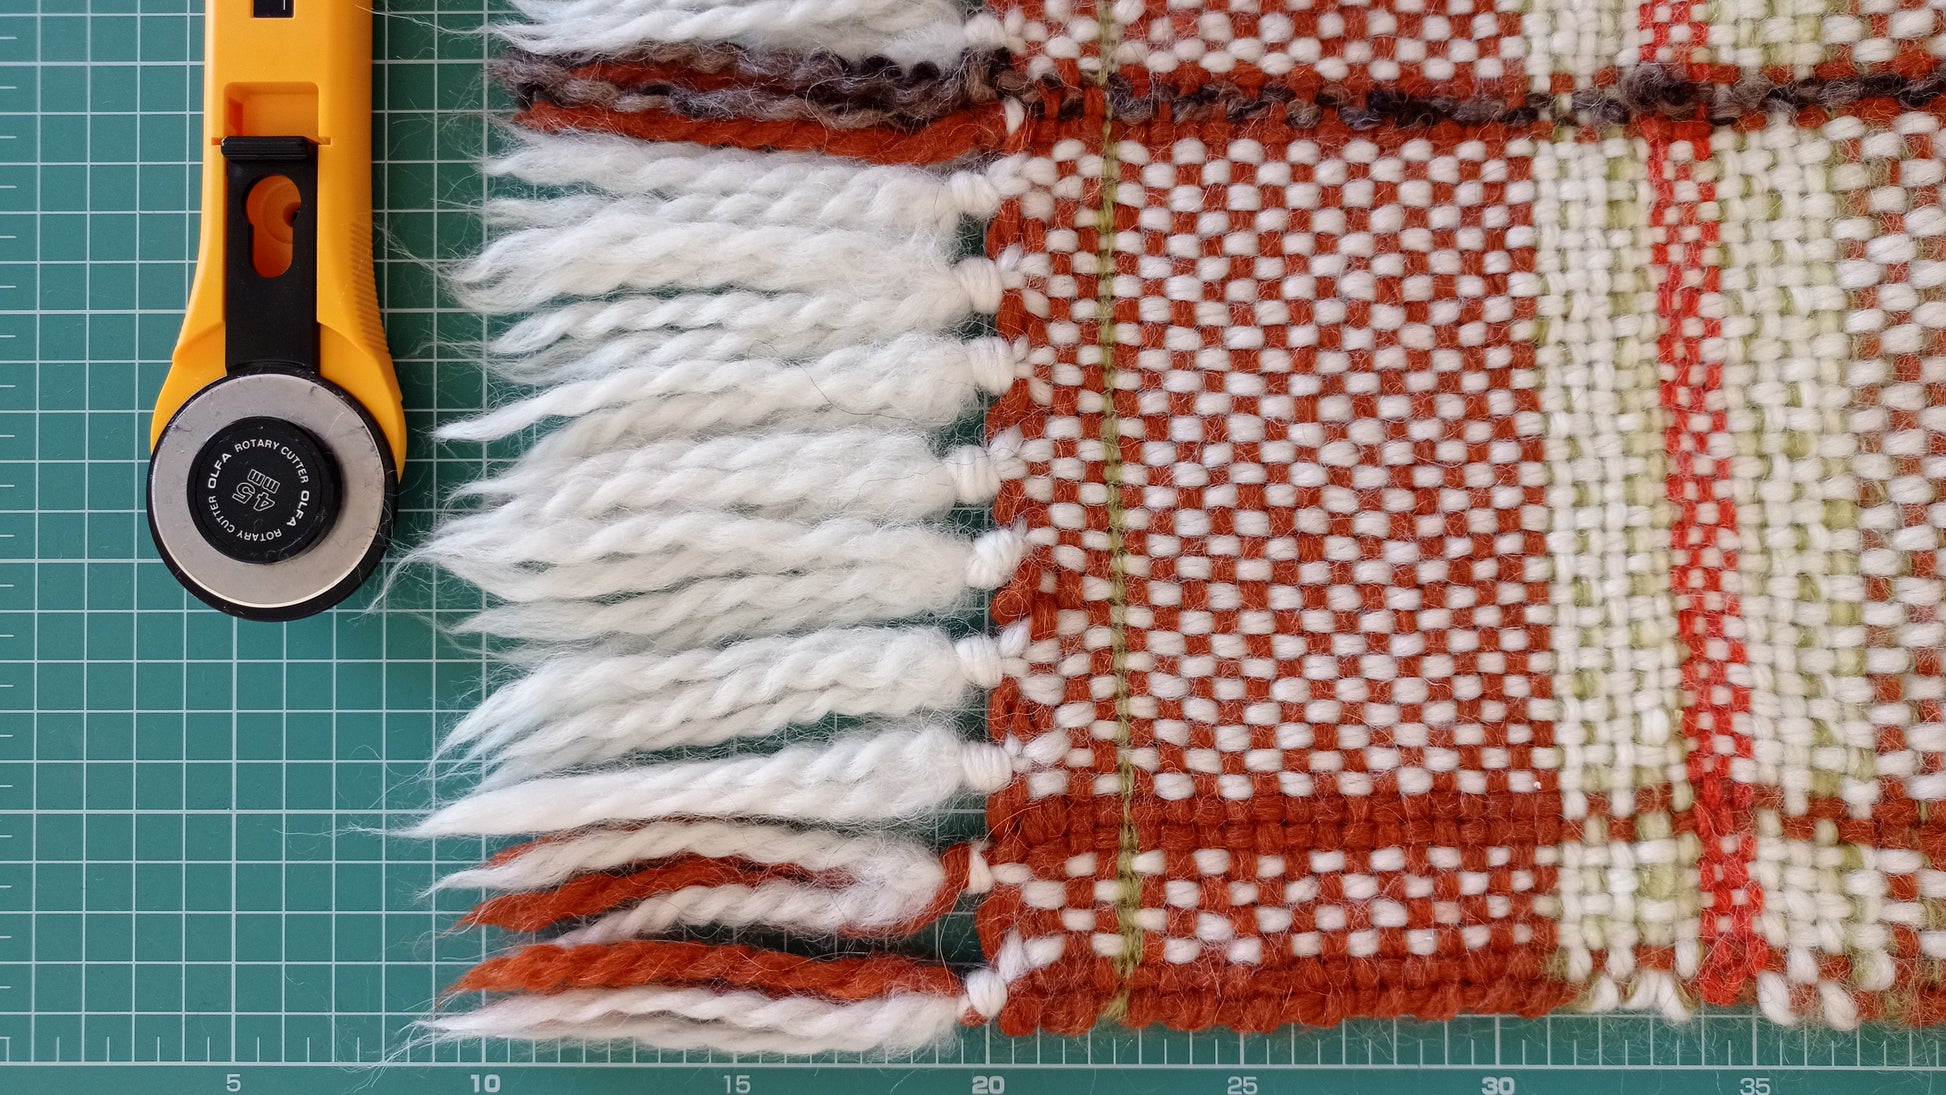 3 Days "Textile Weaving Workshop" and Homestay with Rita in Lisbon, Portugal